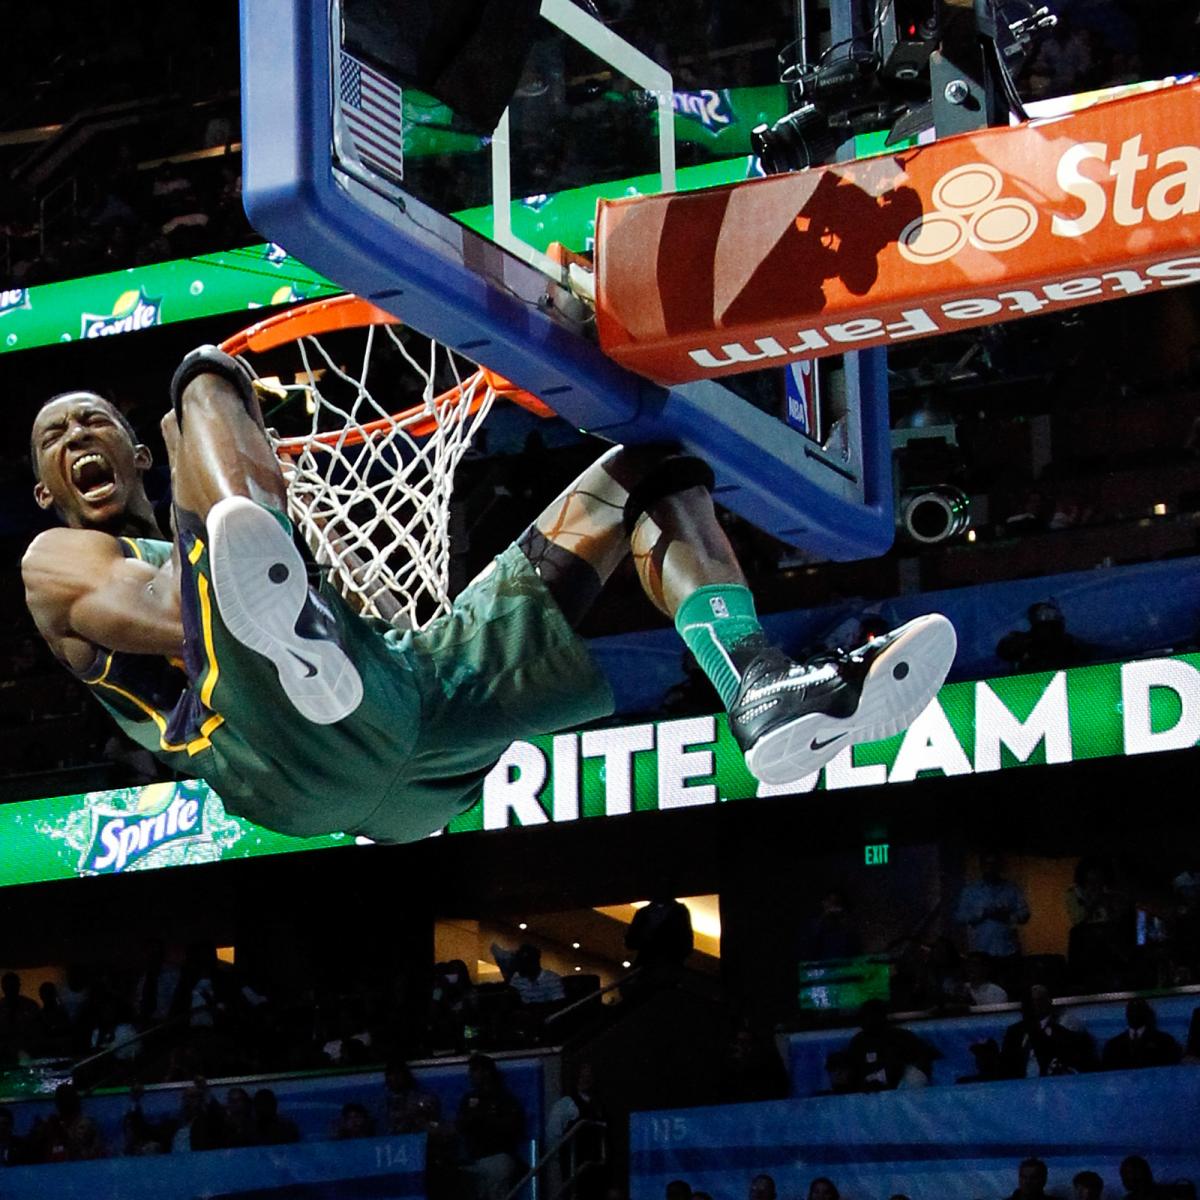 NBA Slam Dunk Contest 2013: Viewers Guide to Anticipated Event